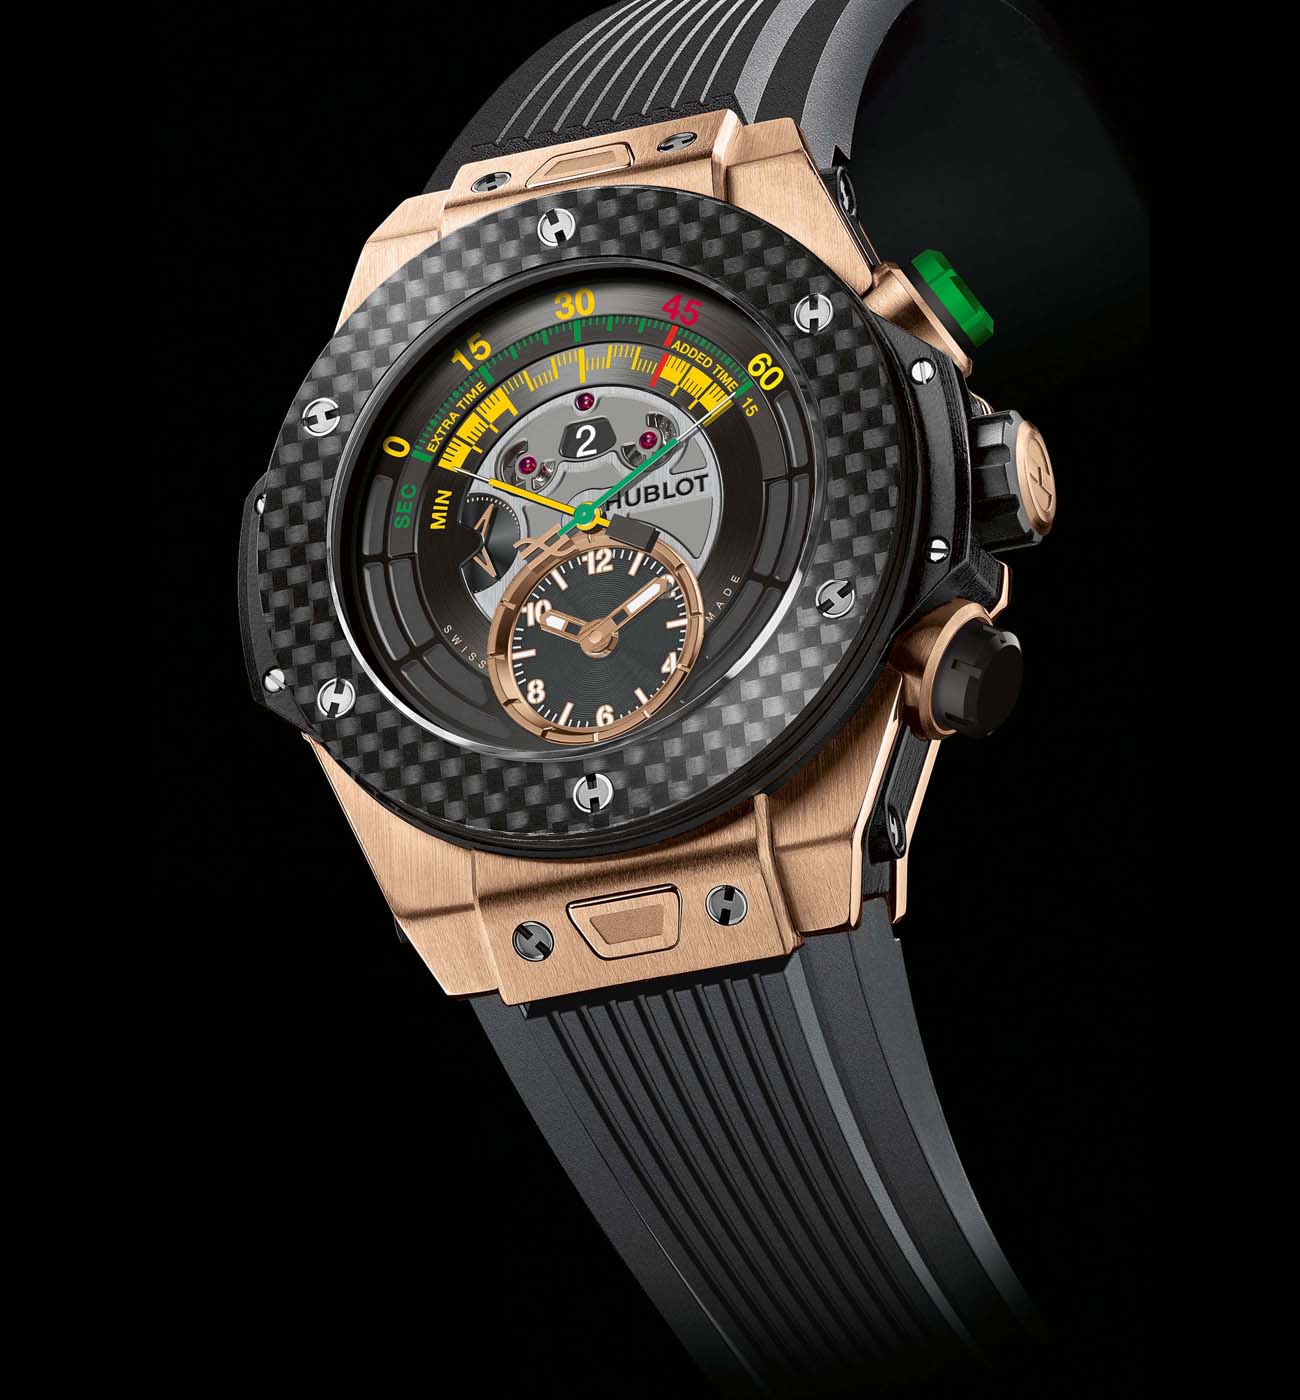 Richard Mille RM 031 Replica Watches